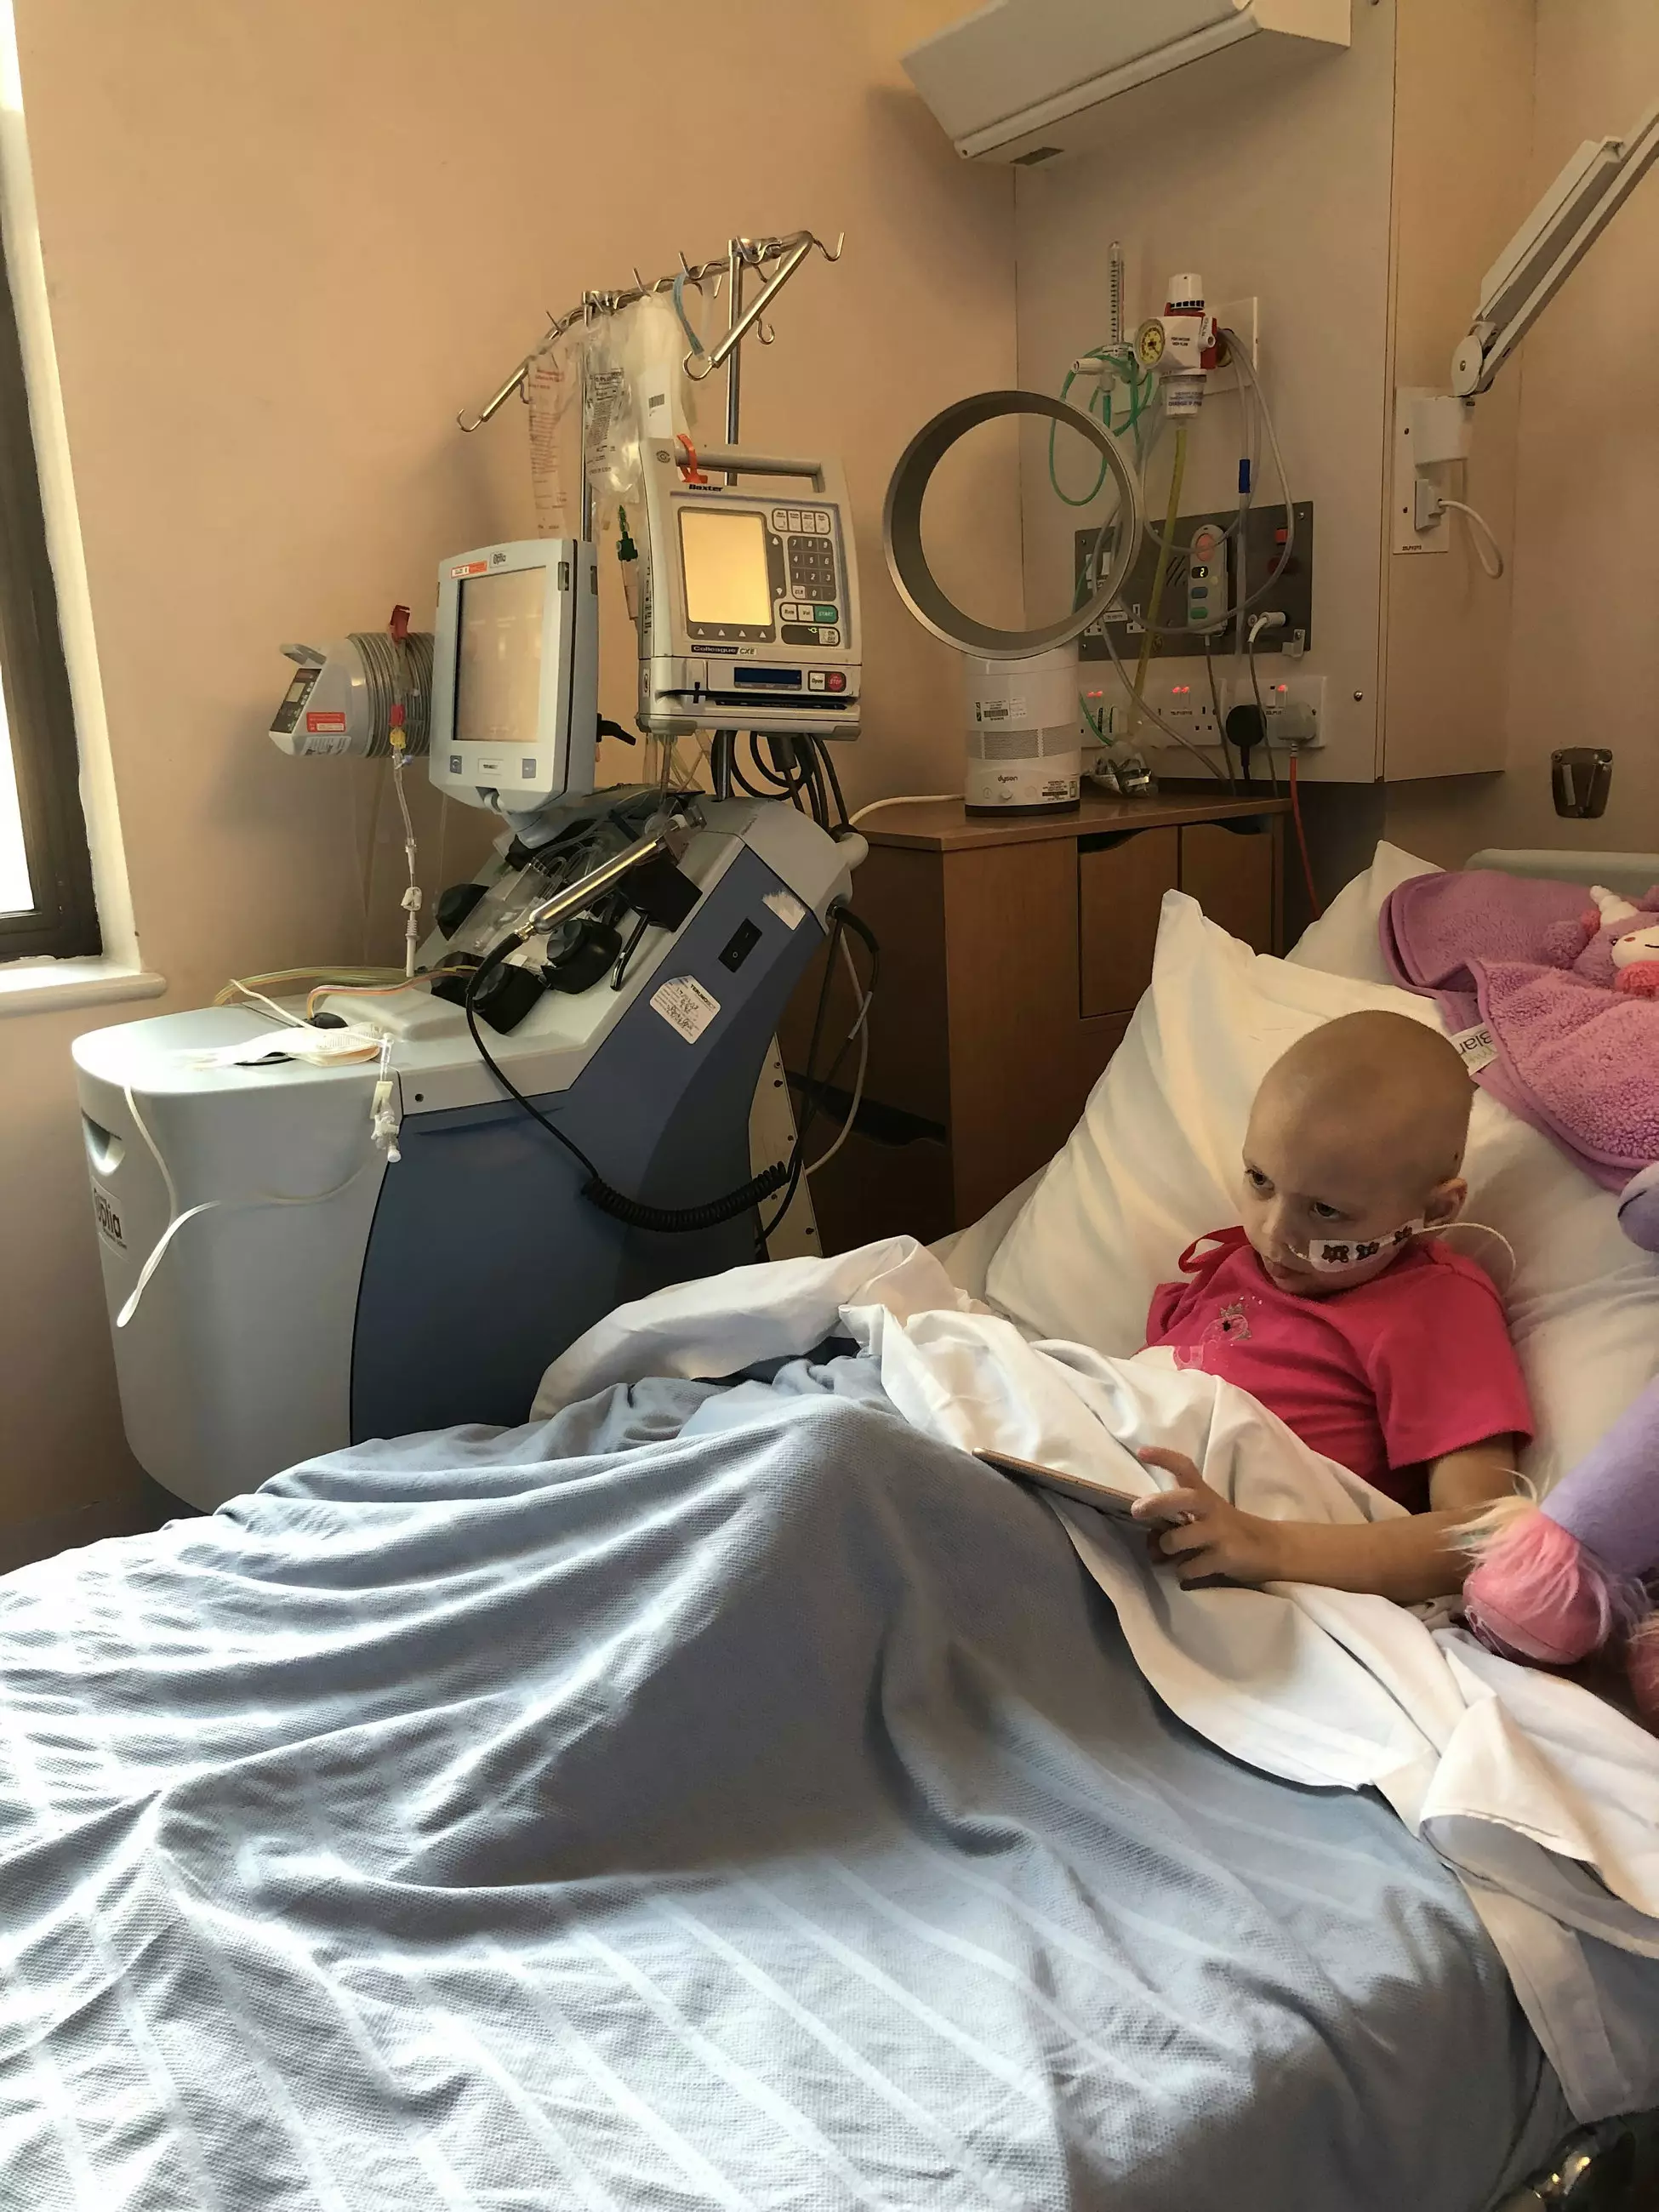 Lulu is battling a rare form of cancer and her parents are trying to raise funds for specialist treatment in the United States.